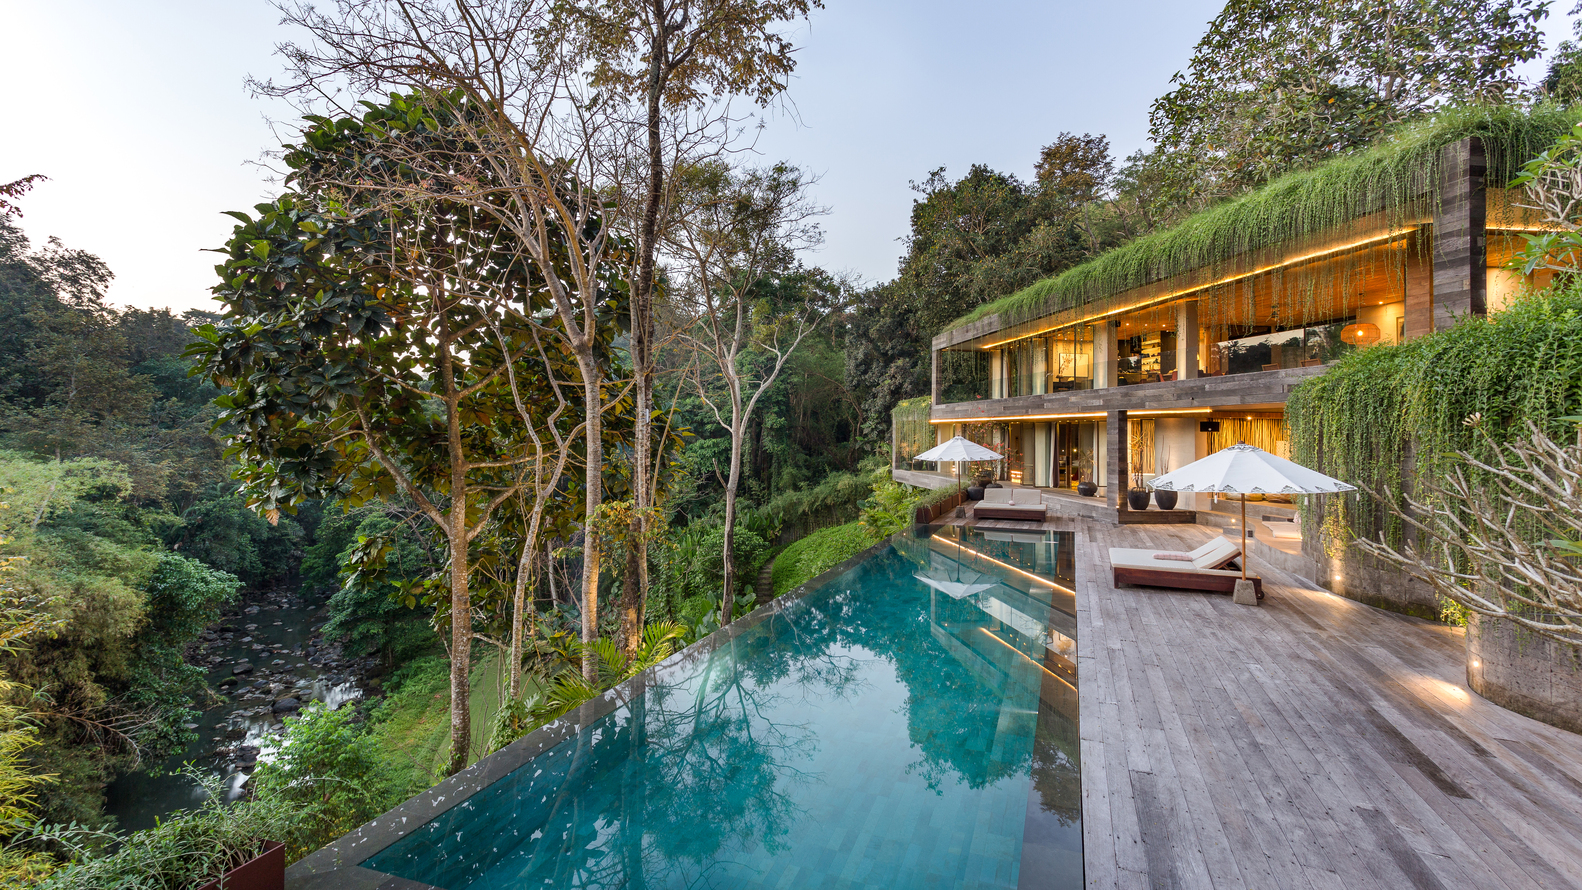 General 1582x890 architecture swimming pool house Indonesia trees reflection Bali jungle infinity edge pool